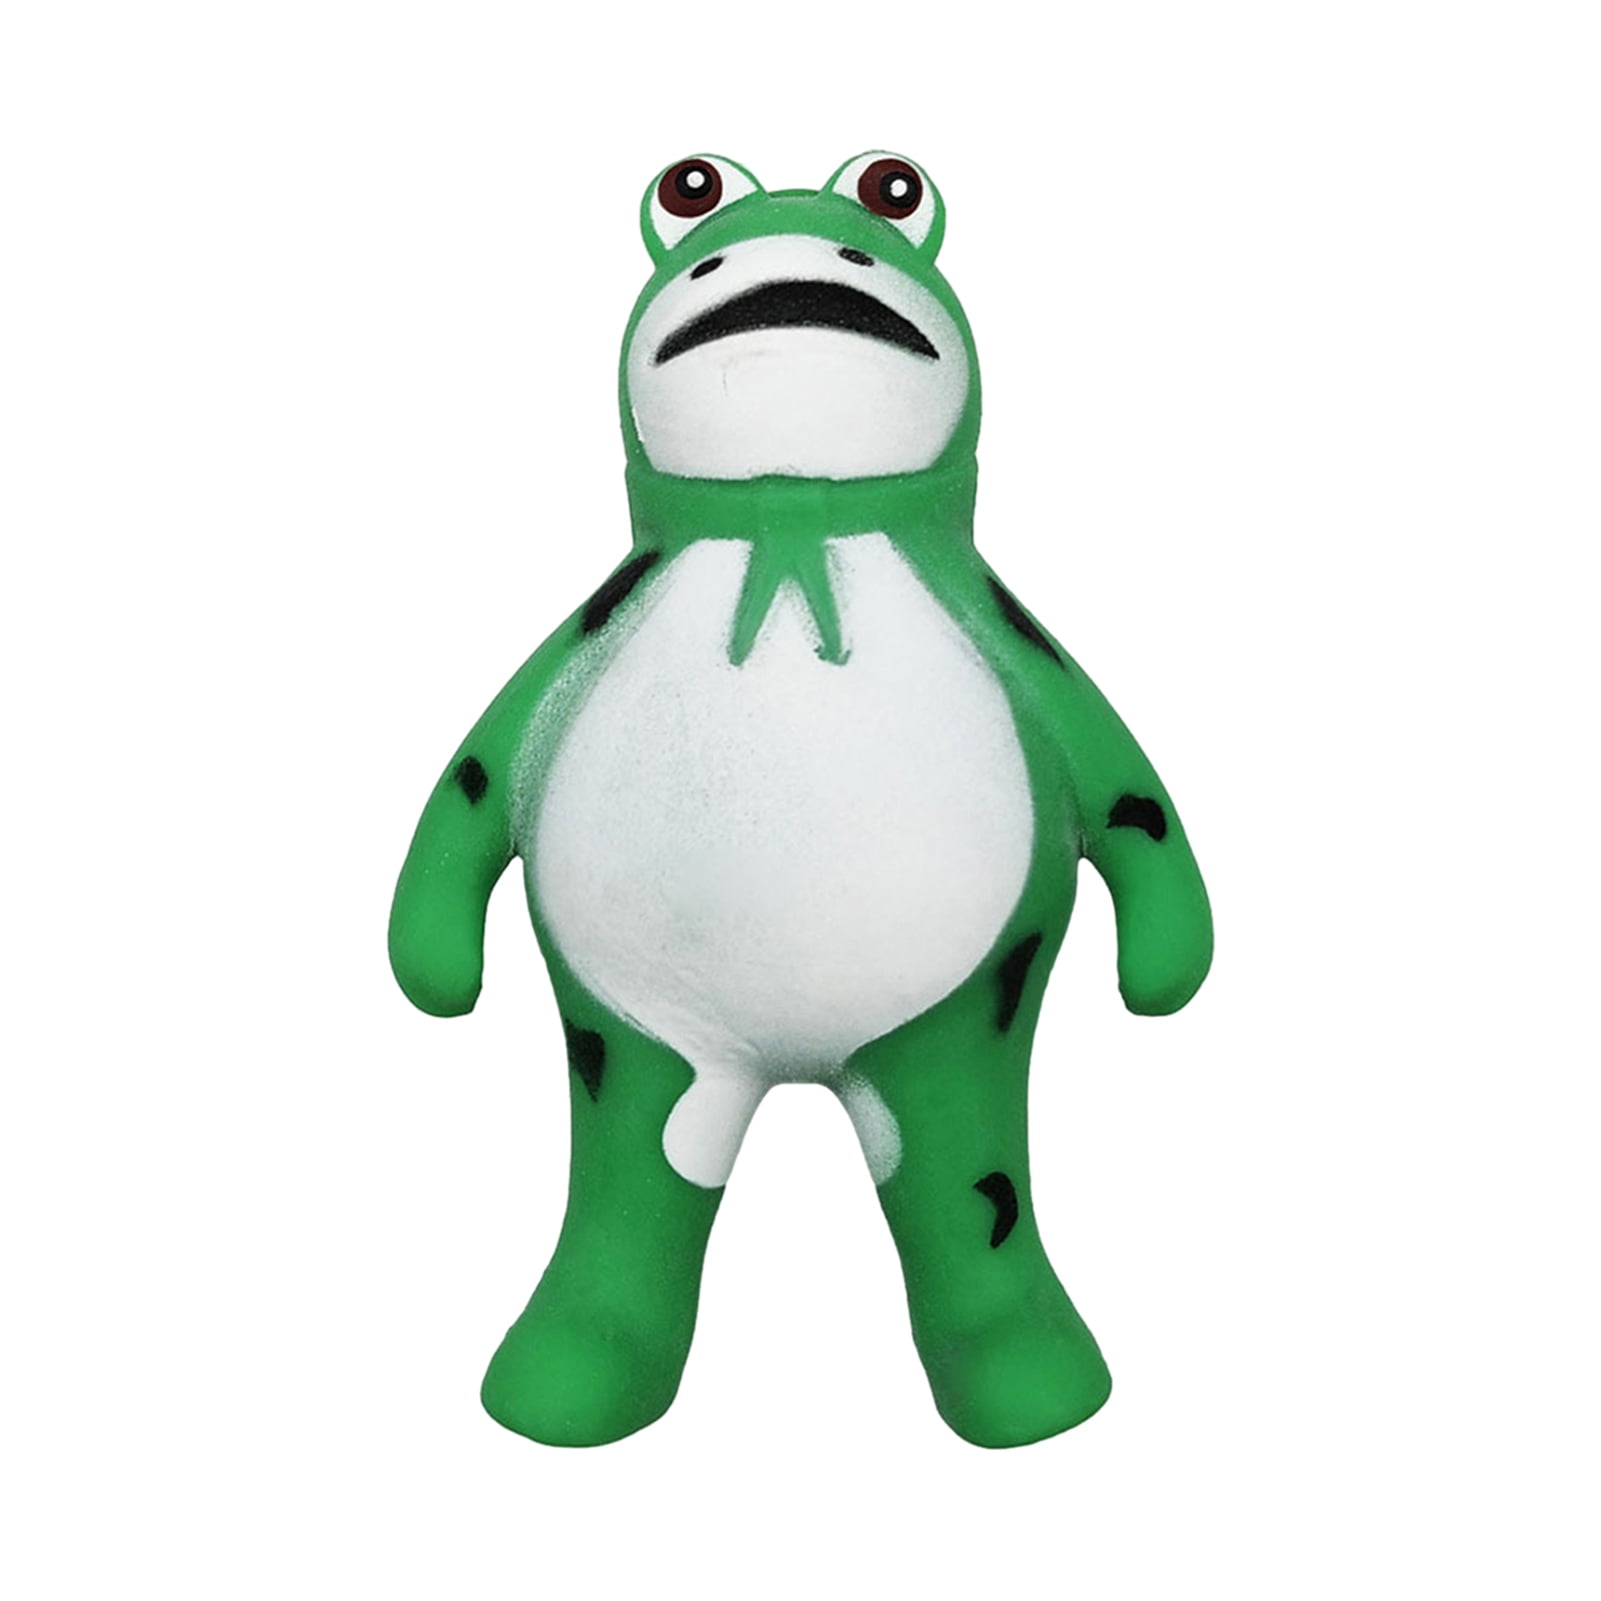 Stress Relief Frog Squeeze Toy - Soft And Stretchy Decompression Toy for  Kids And Adults, Fun Party Favor! 